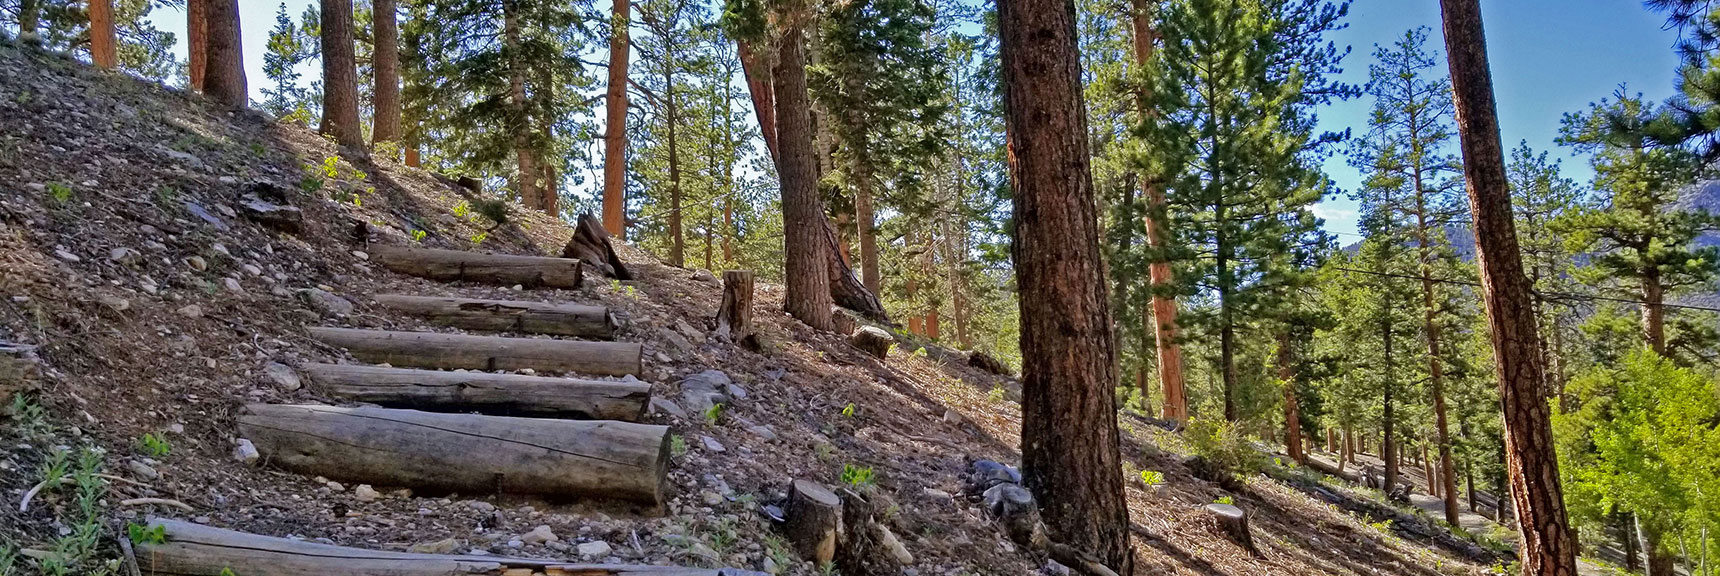 Stairway Down Ridge into Foxtail Girl Scout Camp and Lower Picnic Area | Lee to Kyle Canyon | Foxtail Approach | Mt Charleston Wilderness | Spring Mountains, Nevada